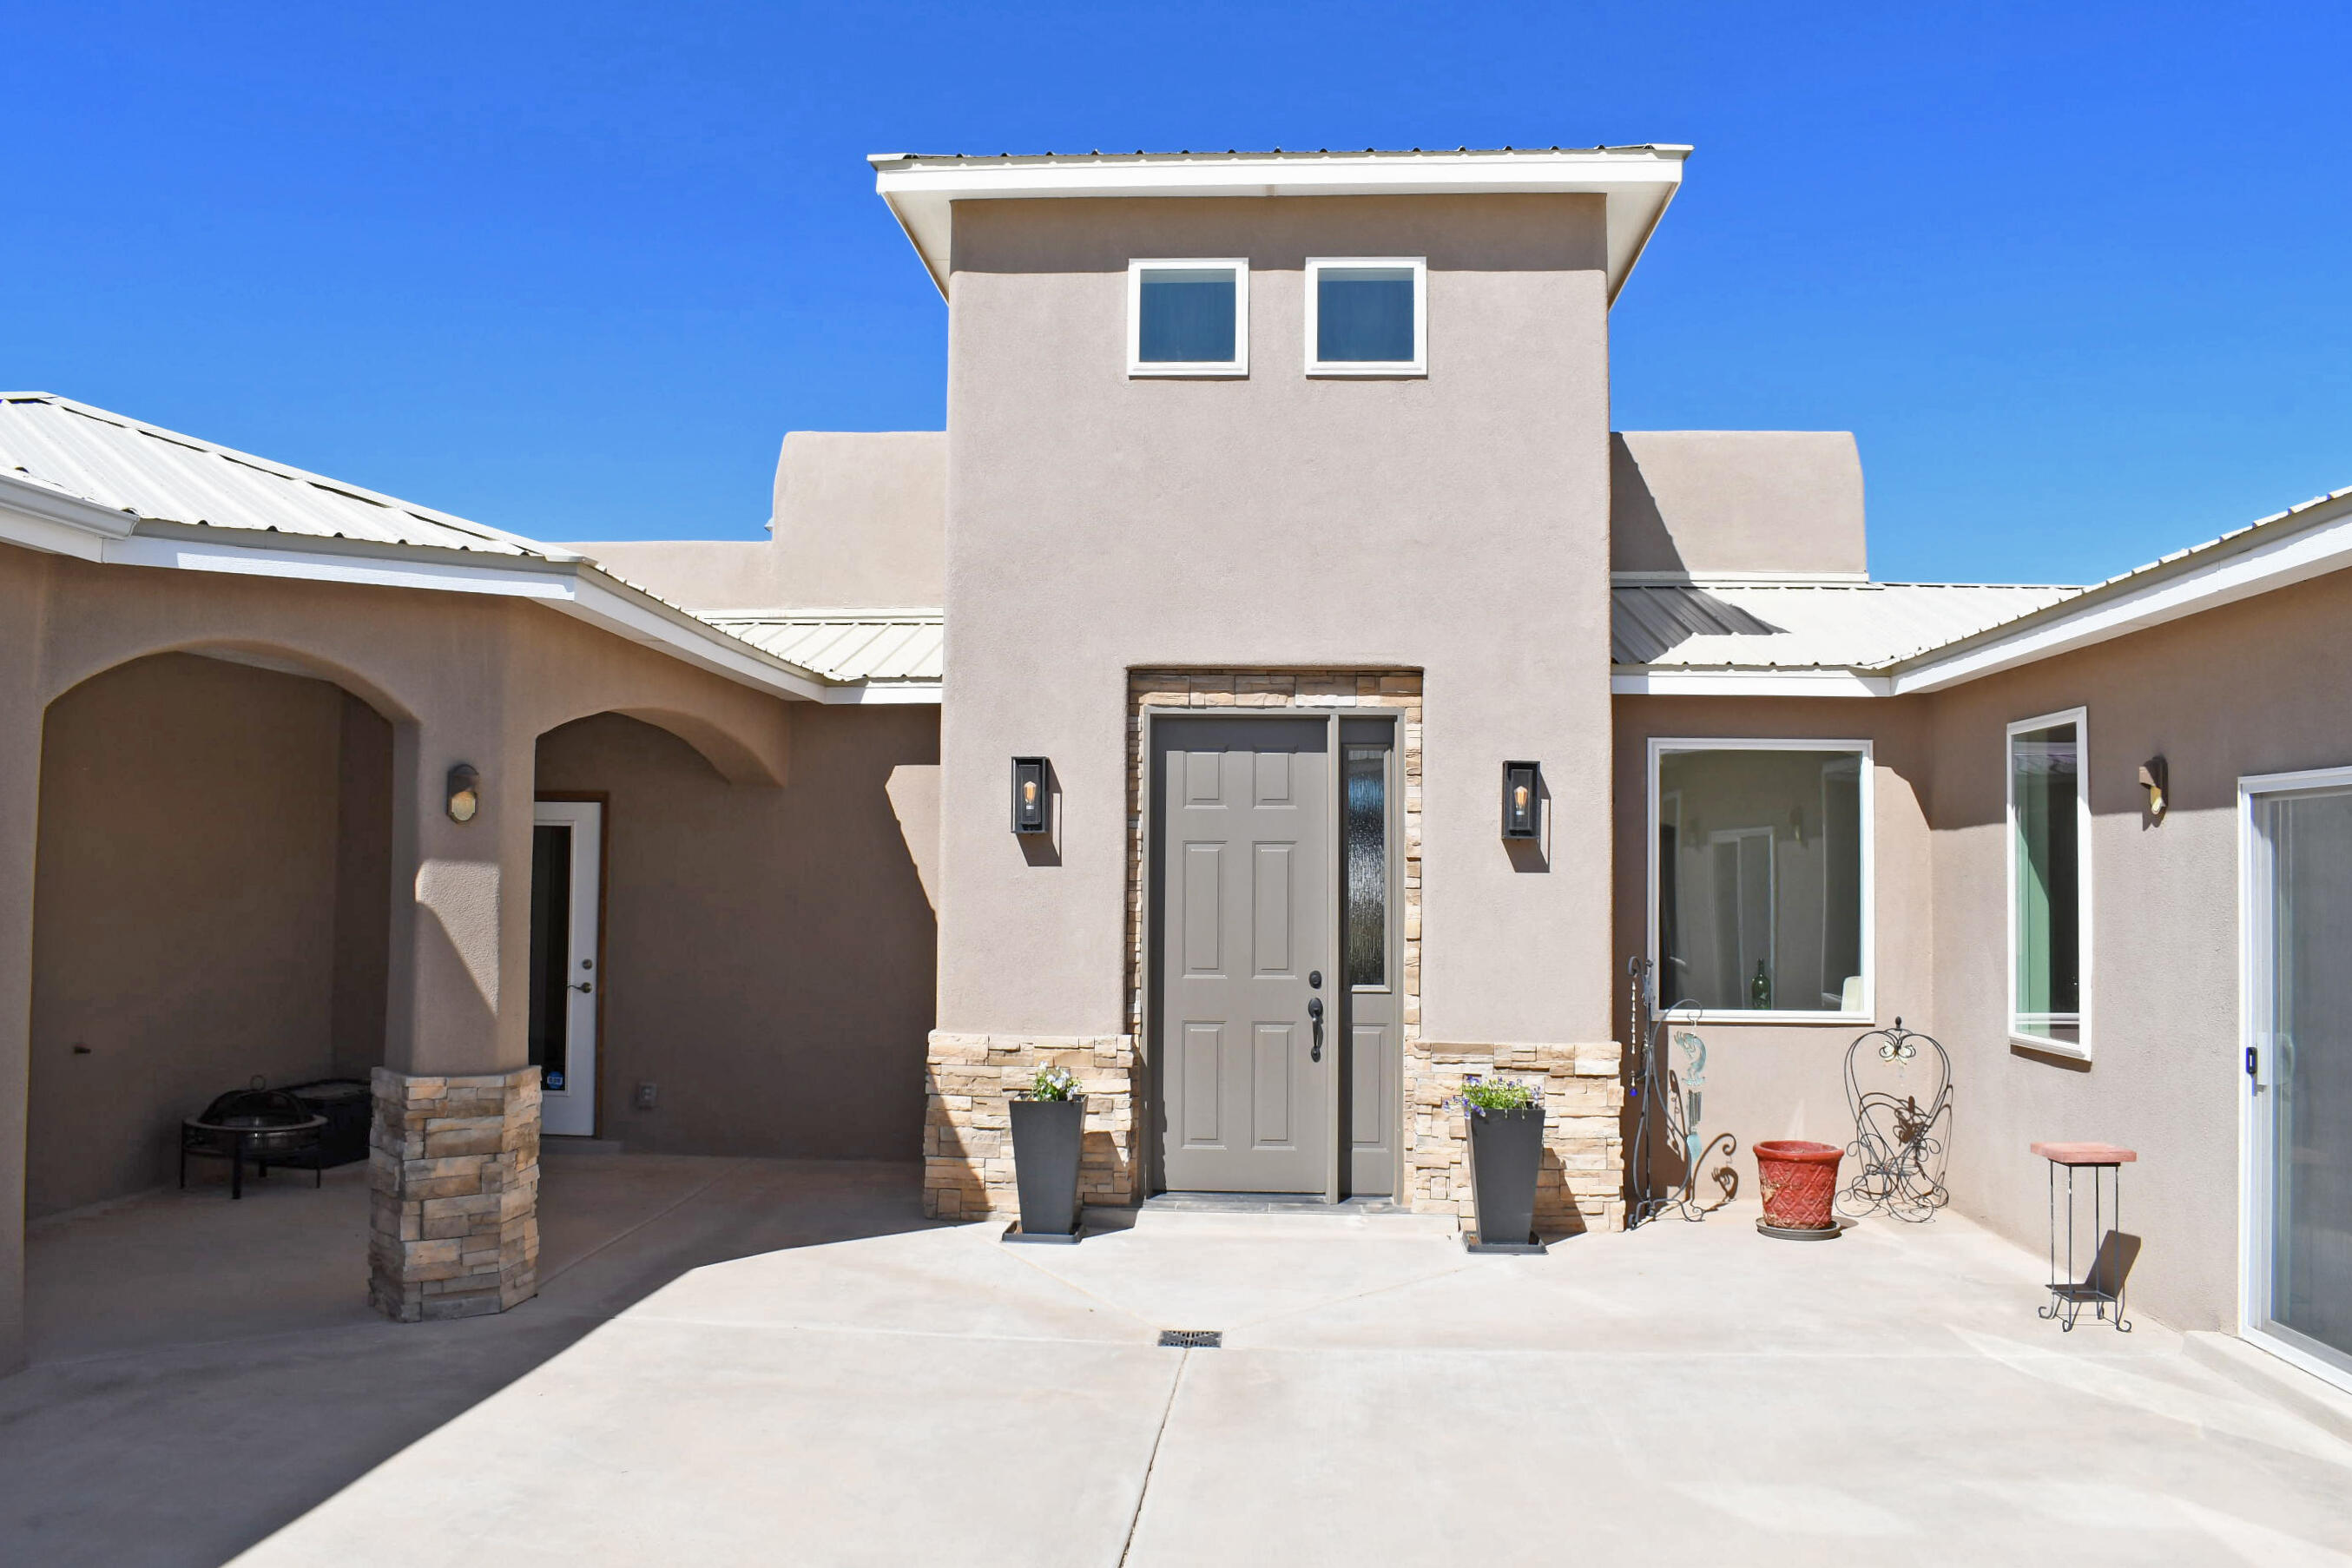 Open House May 7th Saturday 1 to 3PM This custom one story home was built for multi-generational living. Maybe your use would be Air B&B, InLaws, Caretaker, Group home, Home Office, or other unique purpose. Luxurious Courtyard  windows and 5 skylights flood all the home with natural light. Master and 4 BRs on one side, 2 more masters on the other. Dining & Grt Rm windows have view out to swimming pool. All doors are wide, no carpet, individual heat and cooling controls for each Rm. Grand gourmet kitchen with huge island, quartz counters, Farm style sink, island sink, coffee bar sink, built-ins. Solar lease eliminates electric bills. Very efficient! No HEAT was turned on this winter!!  Beauty and quality abounds! 2 double garages are 26'deep.